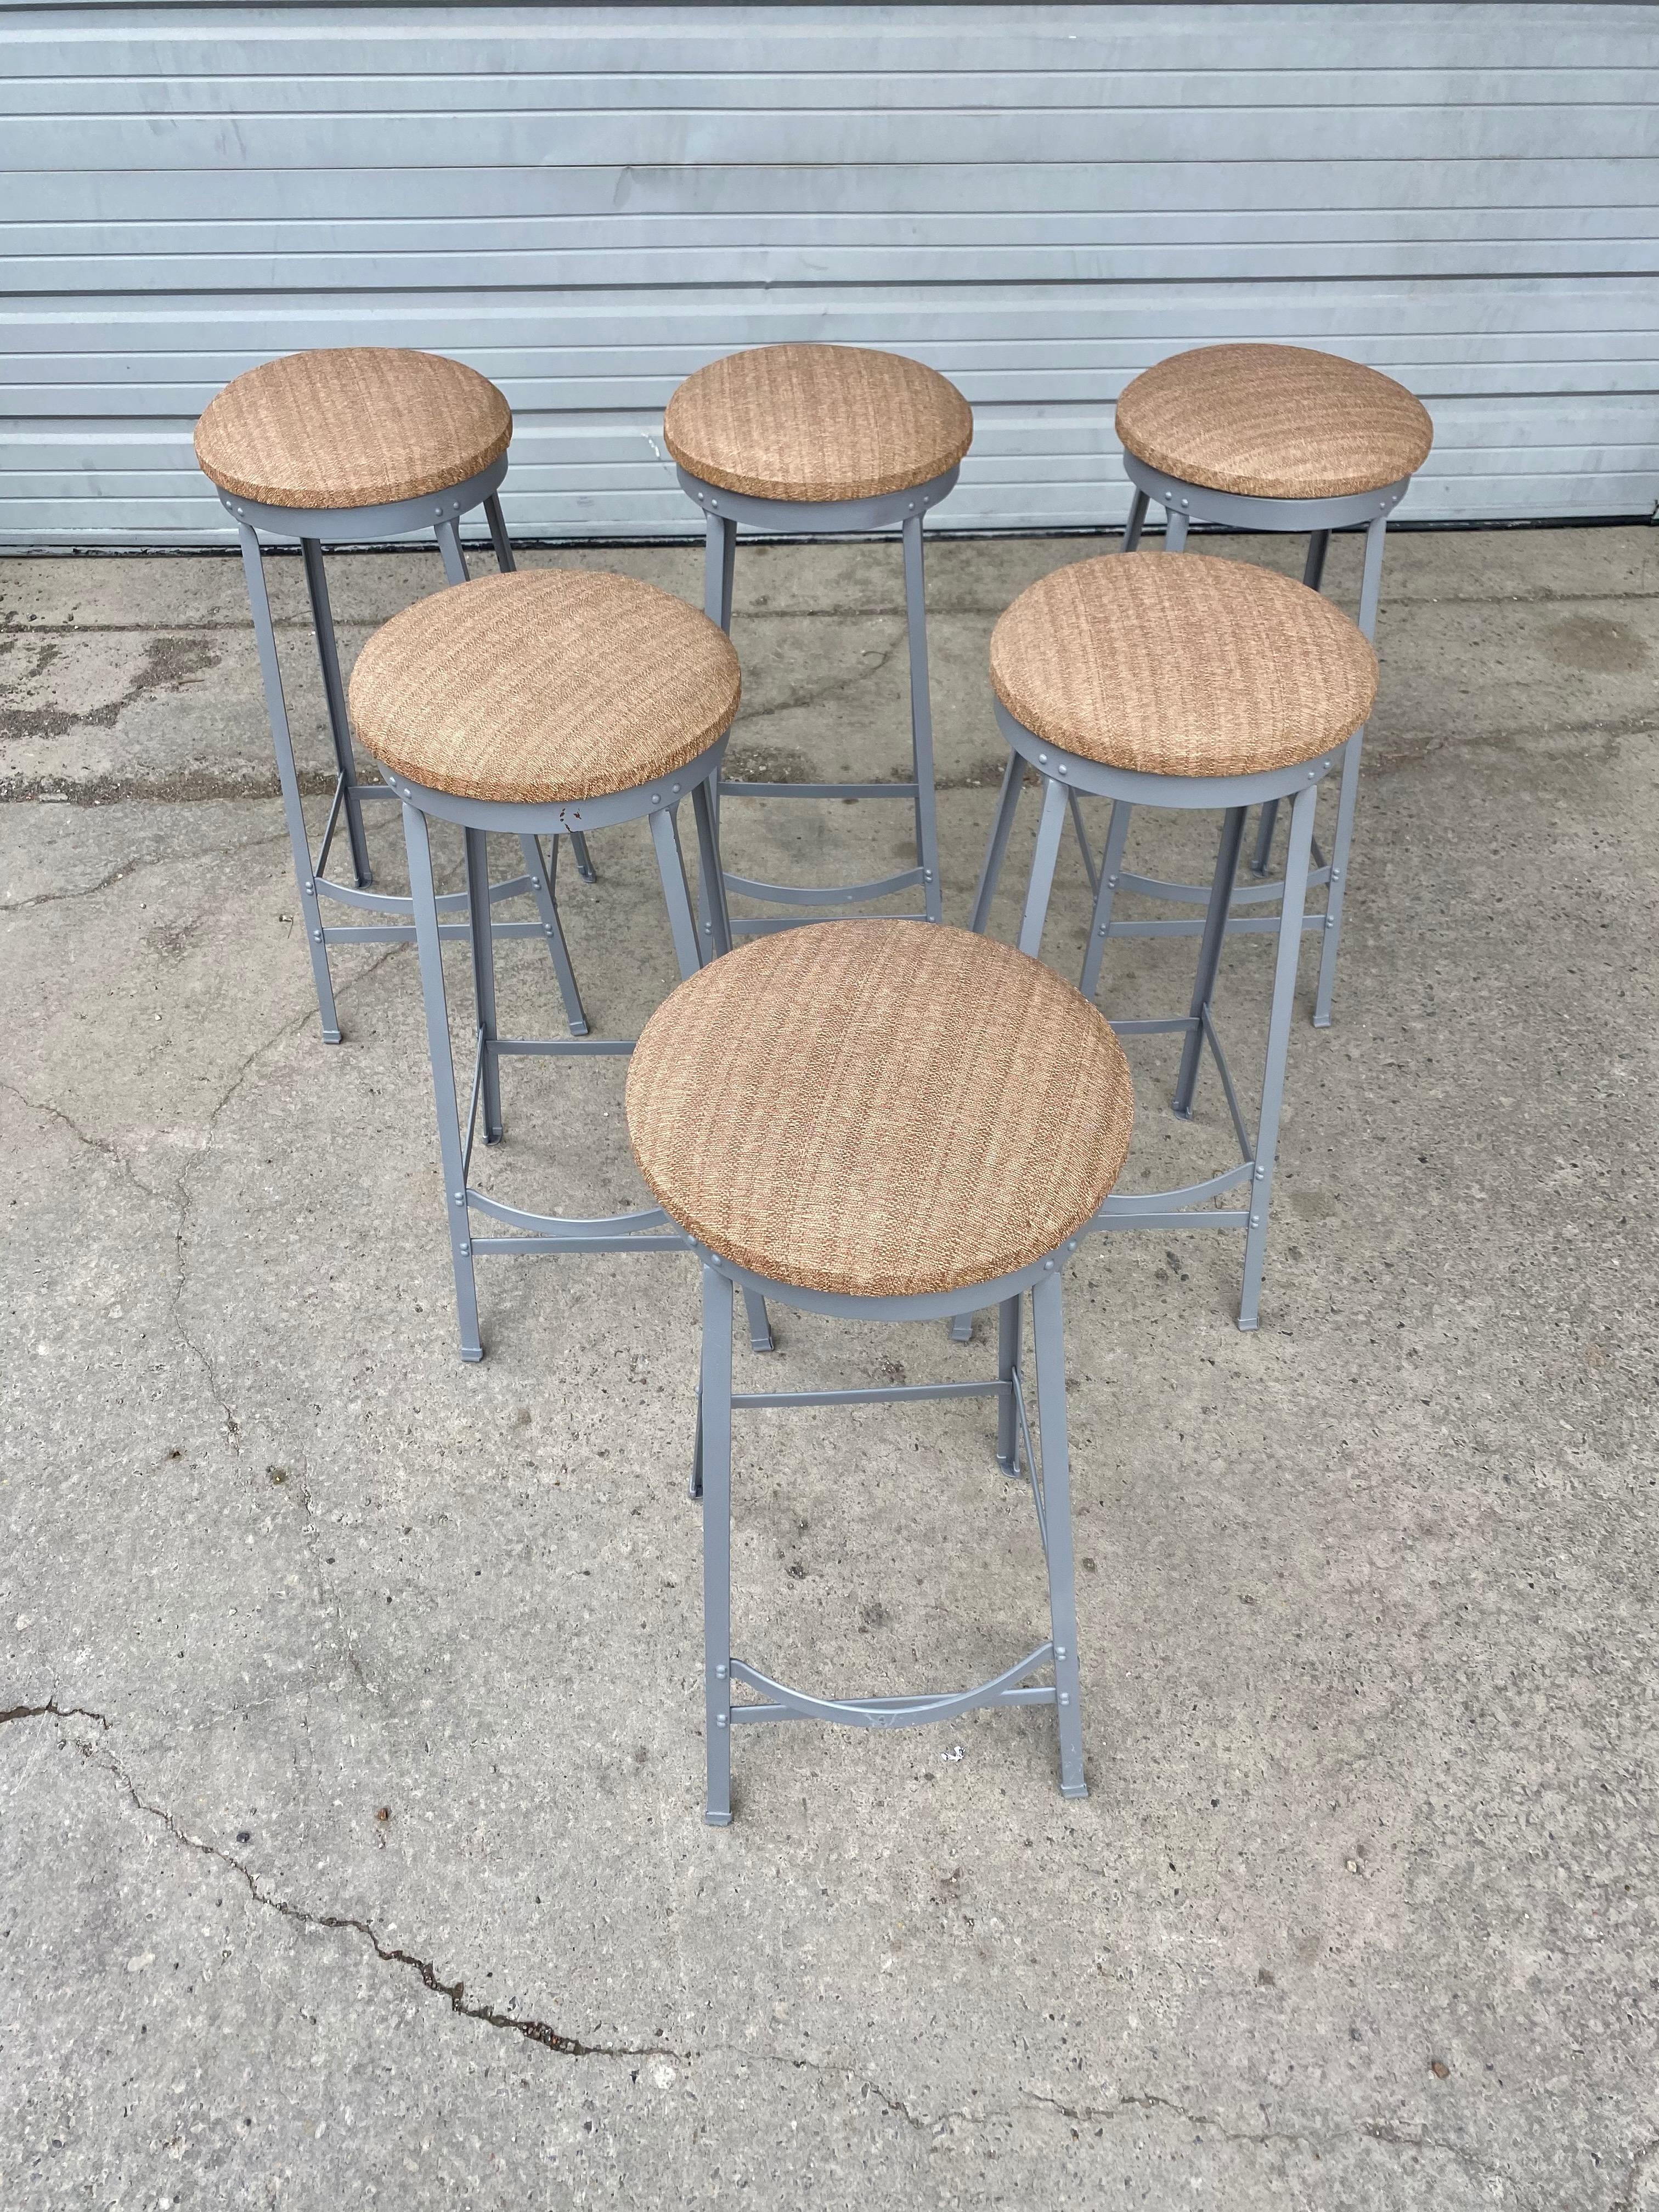 Set of Six American Industrial Bar Stools, Attributed to Toledo Metal Furniture In Good Condition For Sale In Buffalo, NY